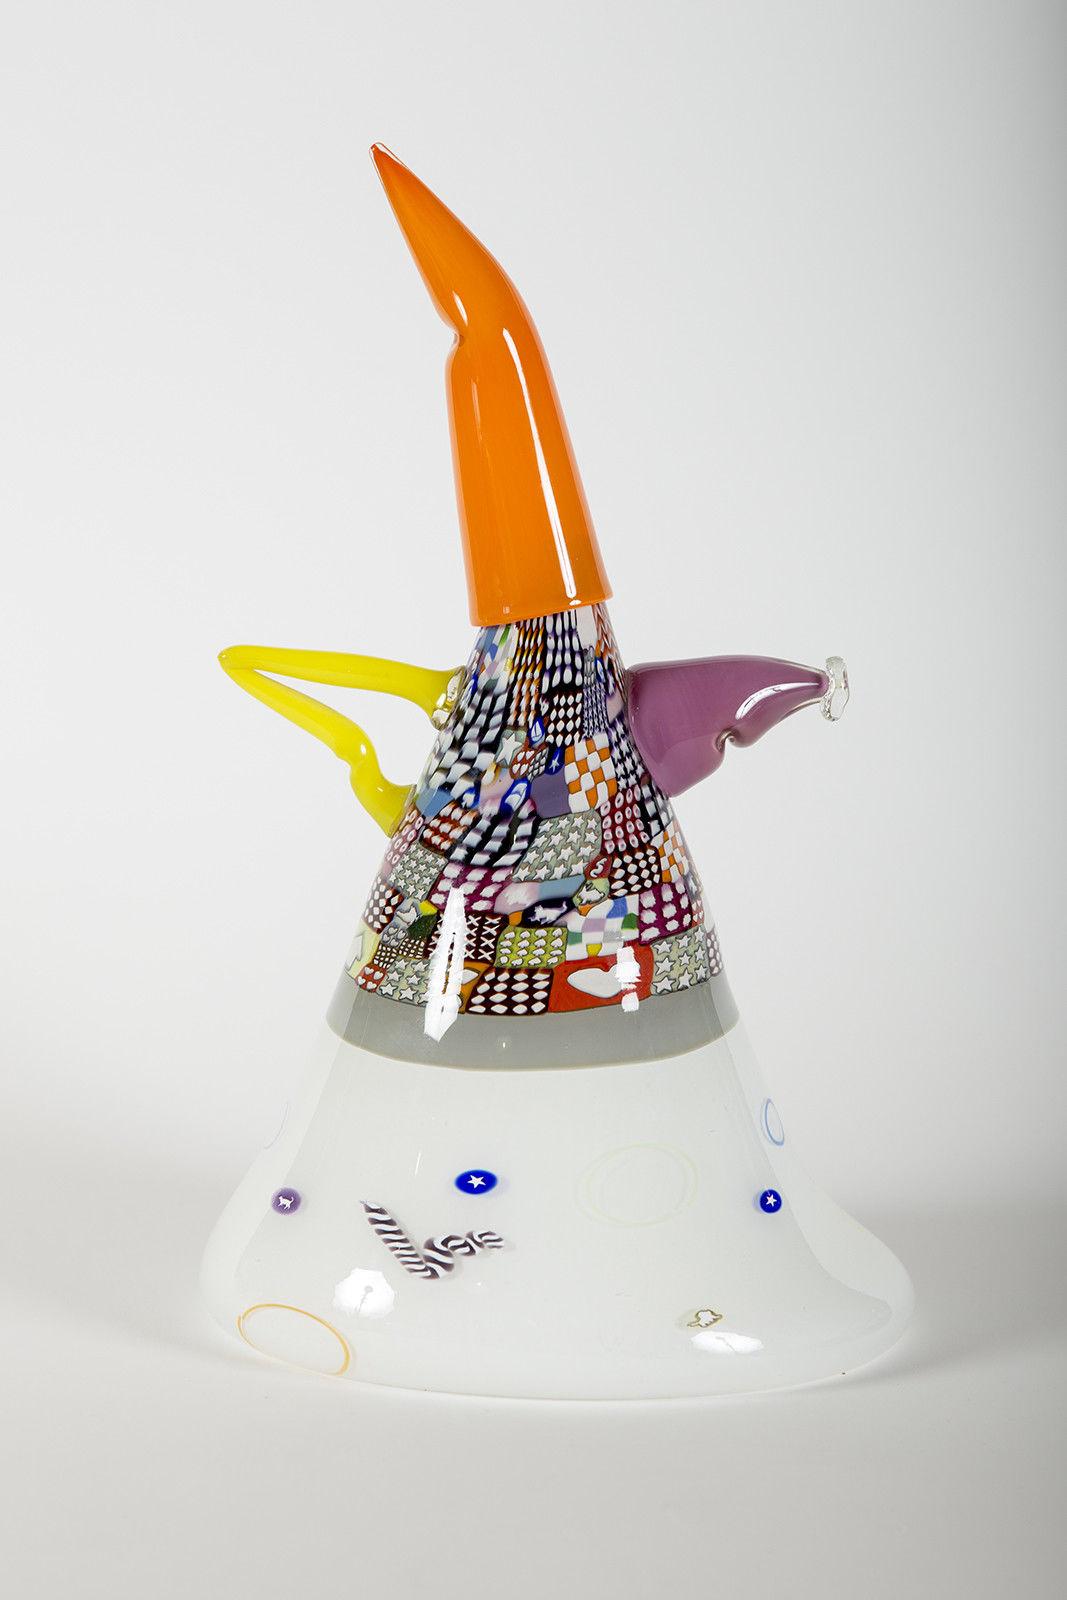 RICHARD MARQUIS (AMERICAN B. 1945)
QUILTED WIZARD TEAPOT
GLASS SCULPTURE
SIGNED ON BOTTOM, 1987
16" x 10"


While Richard “Dick” Marquis is a rather unassuming artist steadily working out of his studio on Whidbey Island, Washington, he is largely